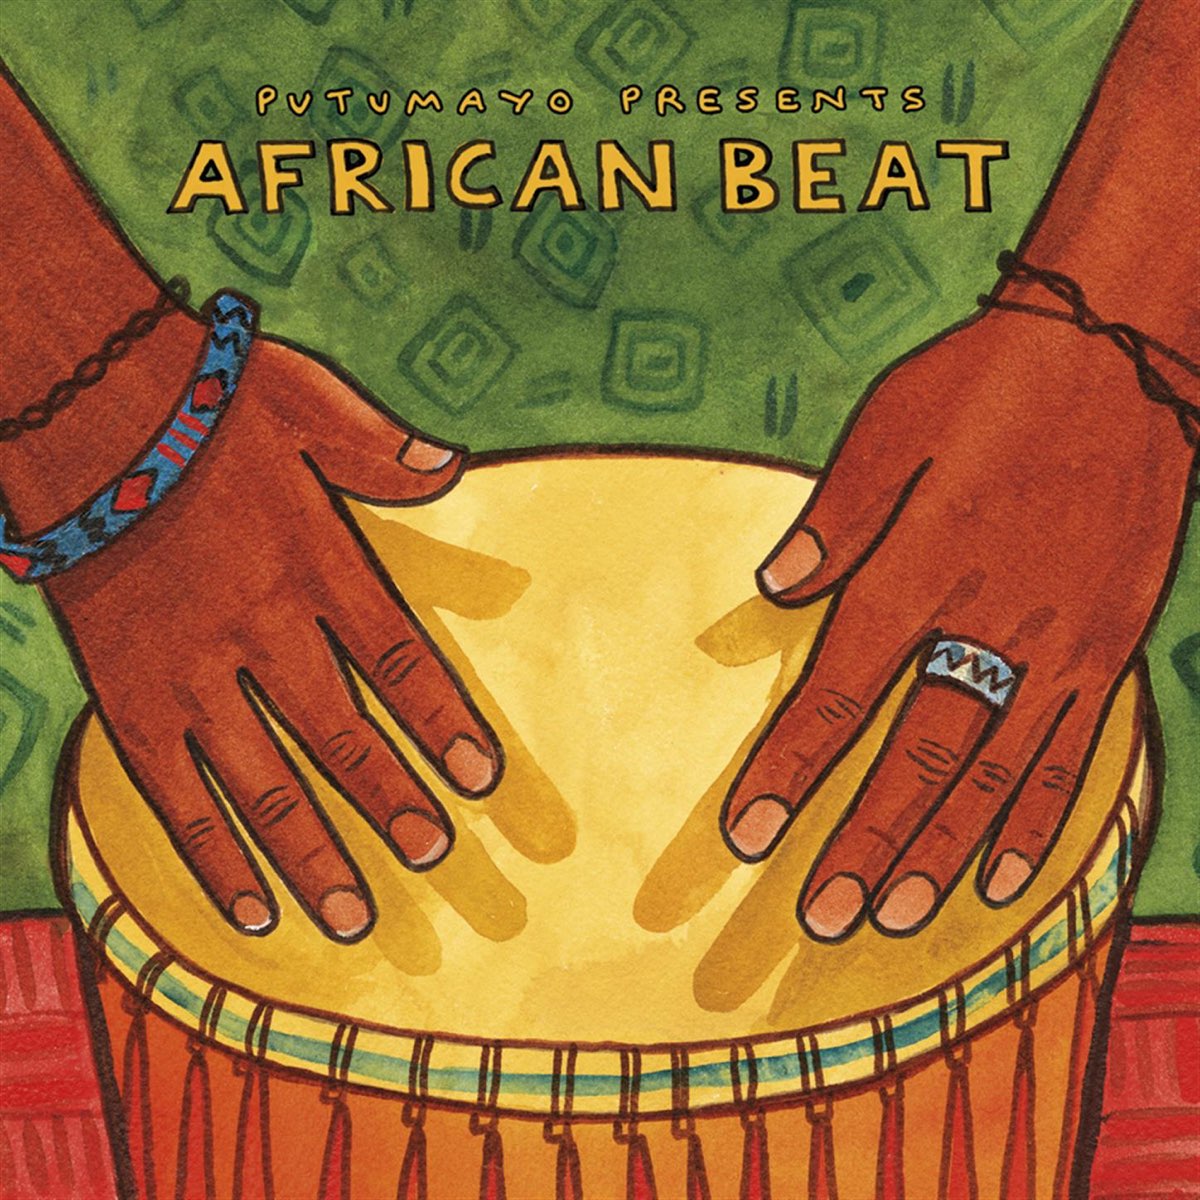 Putumayo Presents African Beat by Various Artists on Apple Music